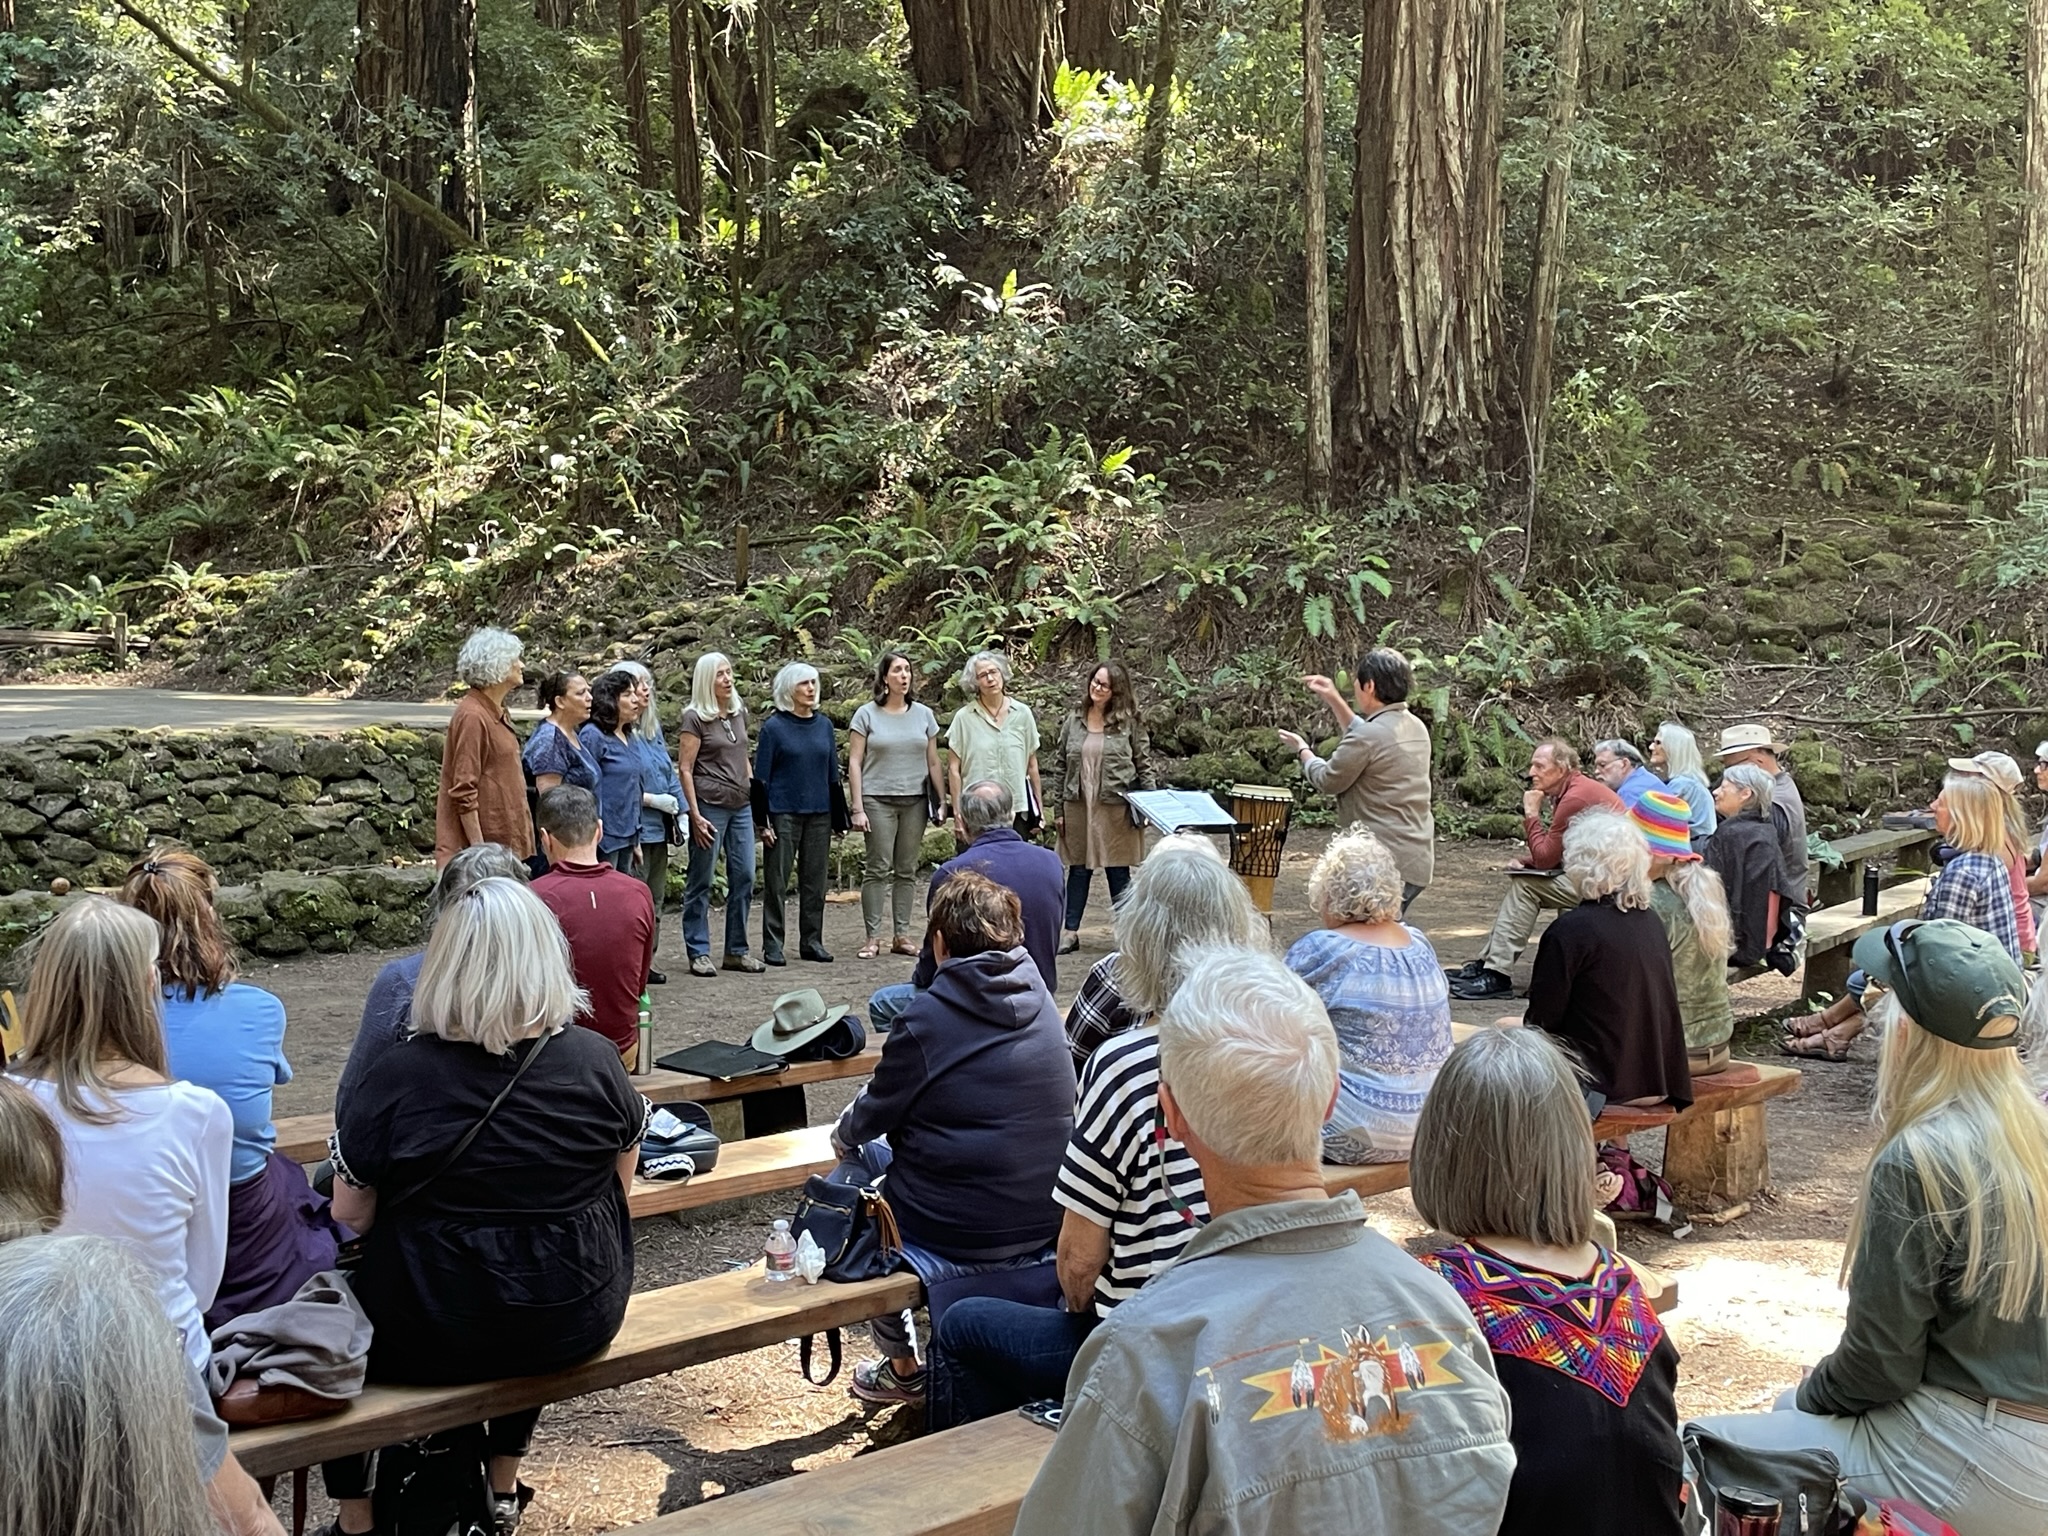 Group of 9 standing singers are led by a conductor, in front of an audience of around 150 people, against a backdrop of redwoods and ferns.